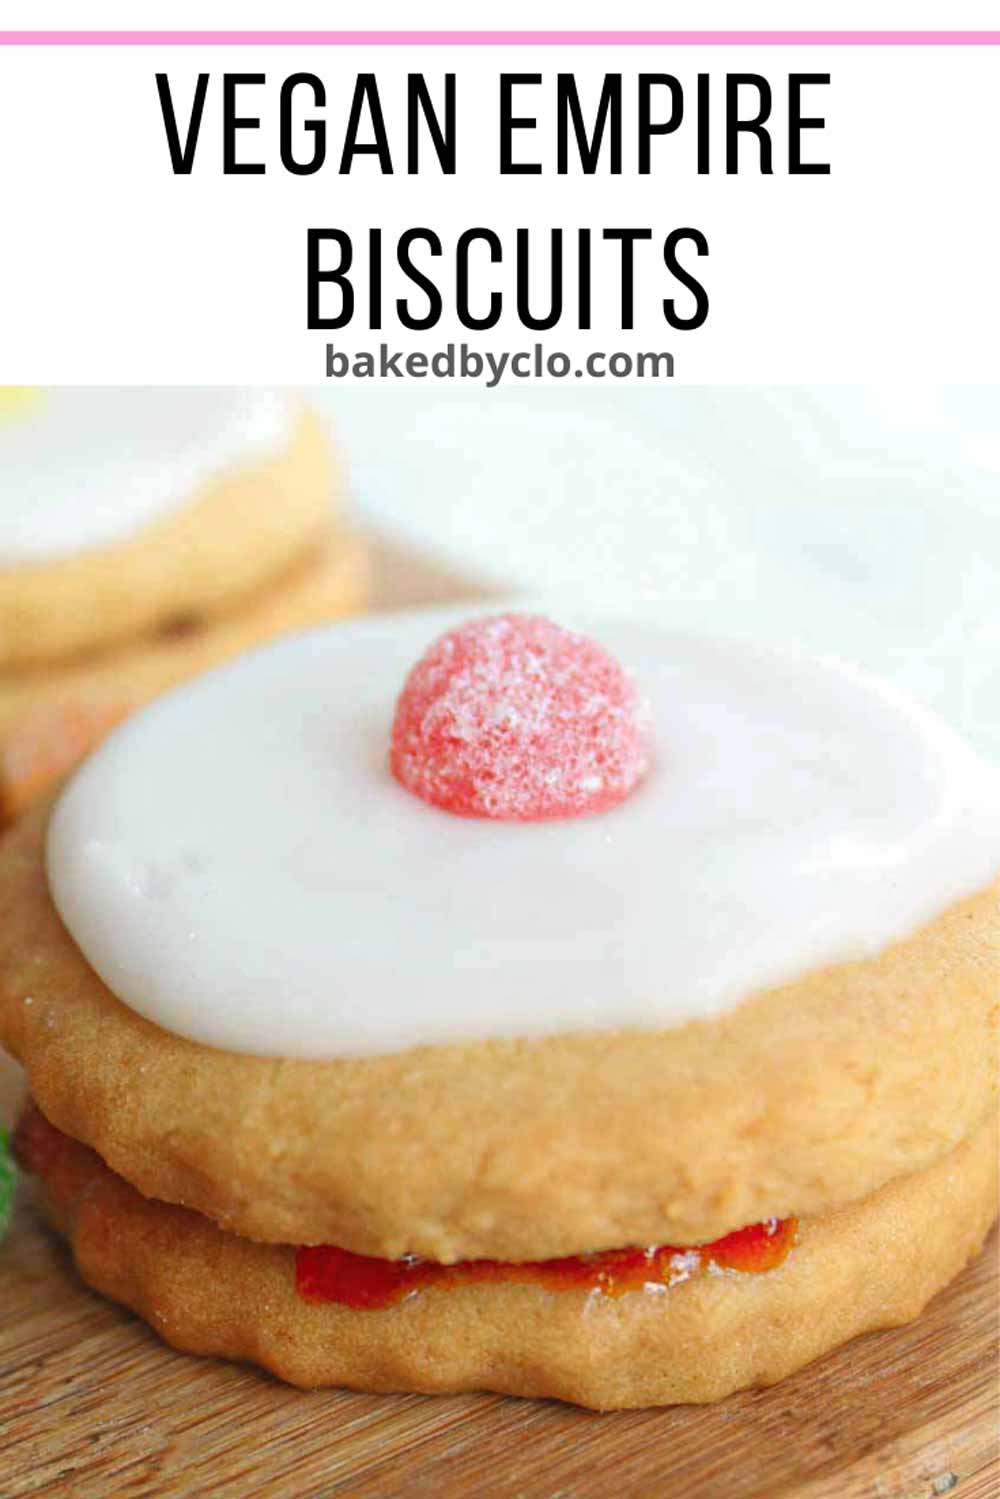 Pin For Later Image Of Vegan Empire Biscuit